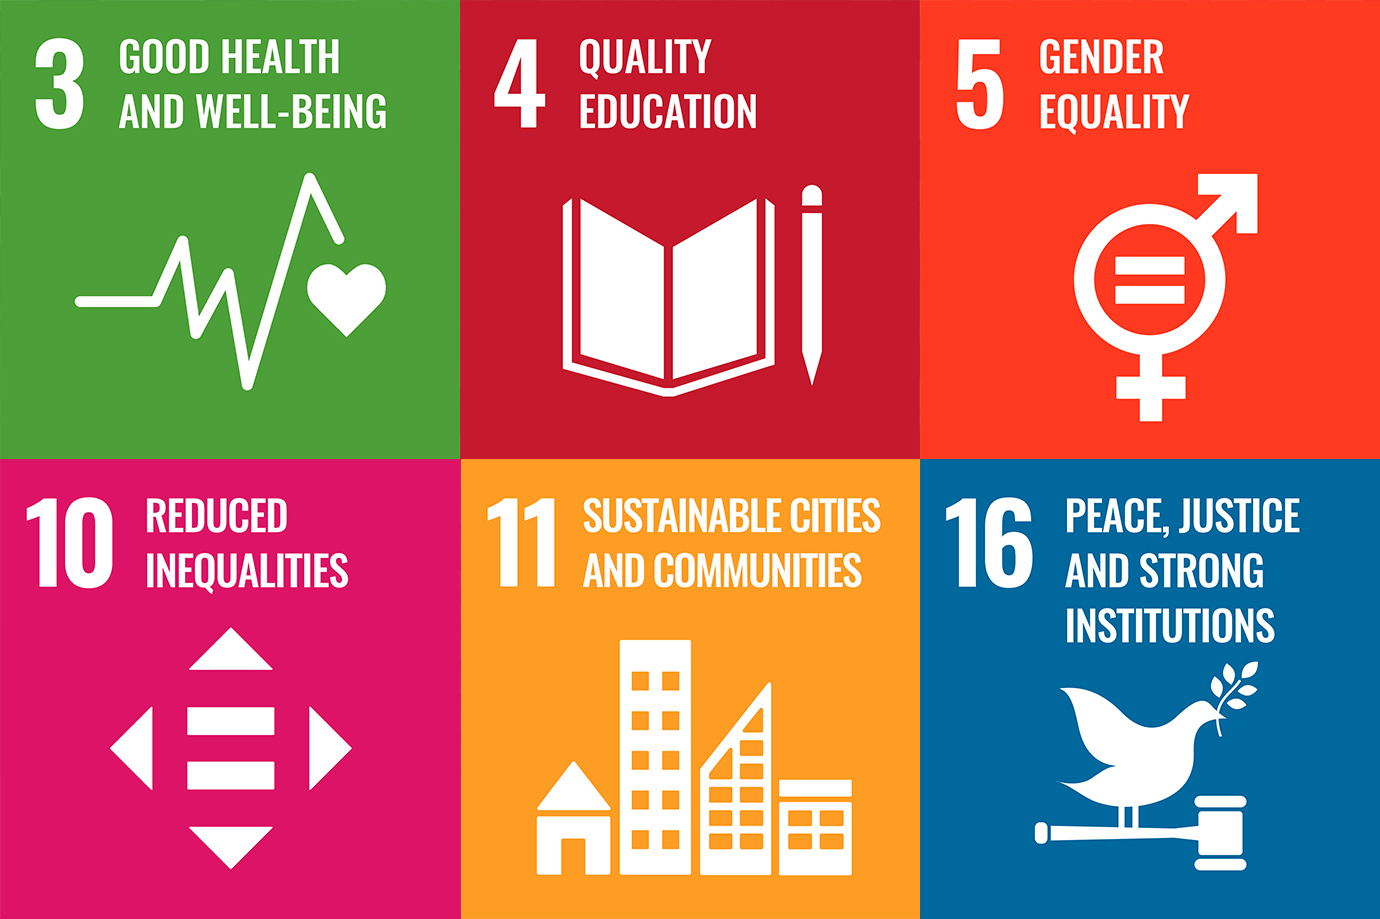 Six of the UN SDG Goals; good health and well-being, quality education, gender equality, reduced inequalities, sustainable cities and communities and peace, justice and strong institutions.